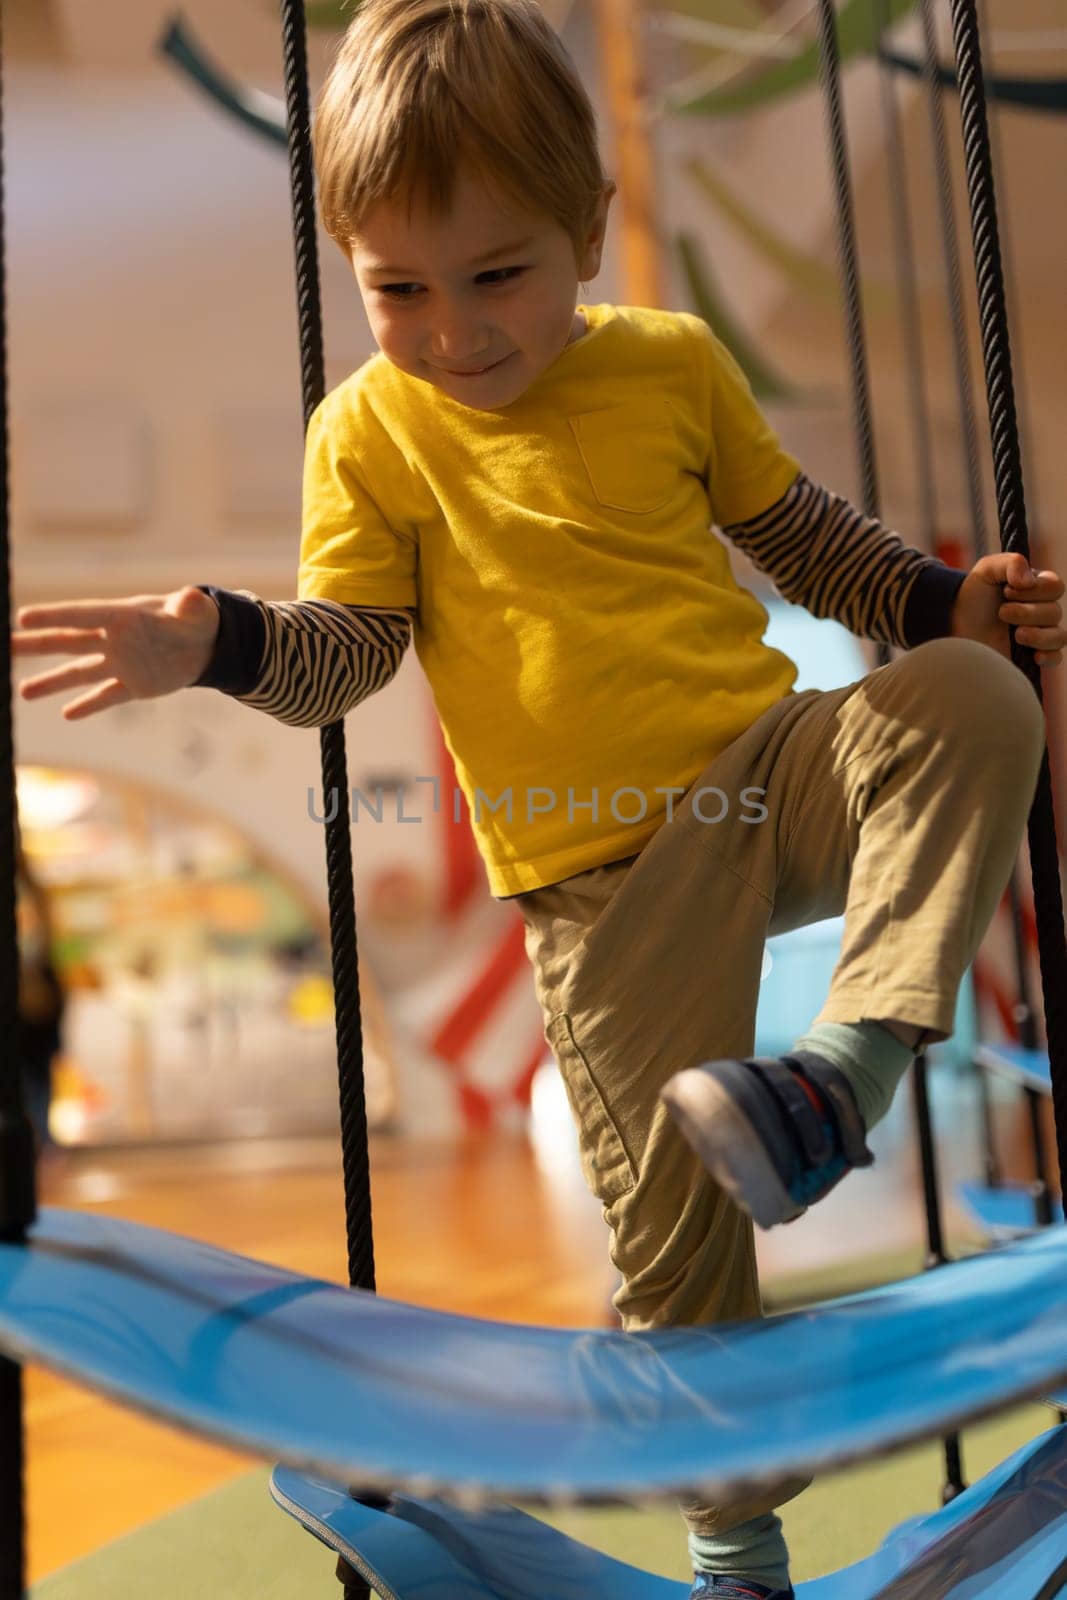 A young boy is playing on a swing set. He is wearing a yellow shirt and khaki pants